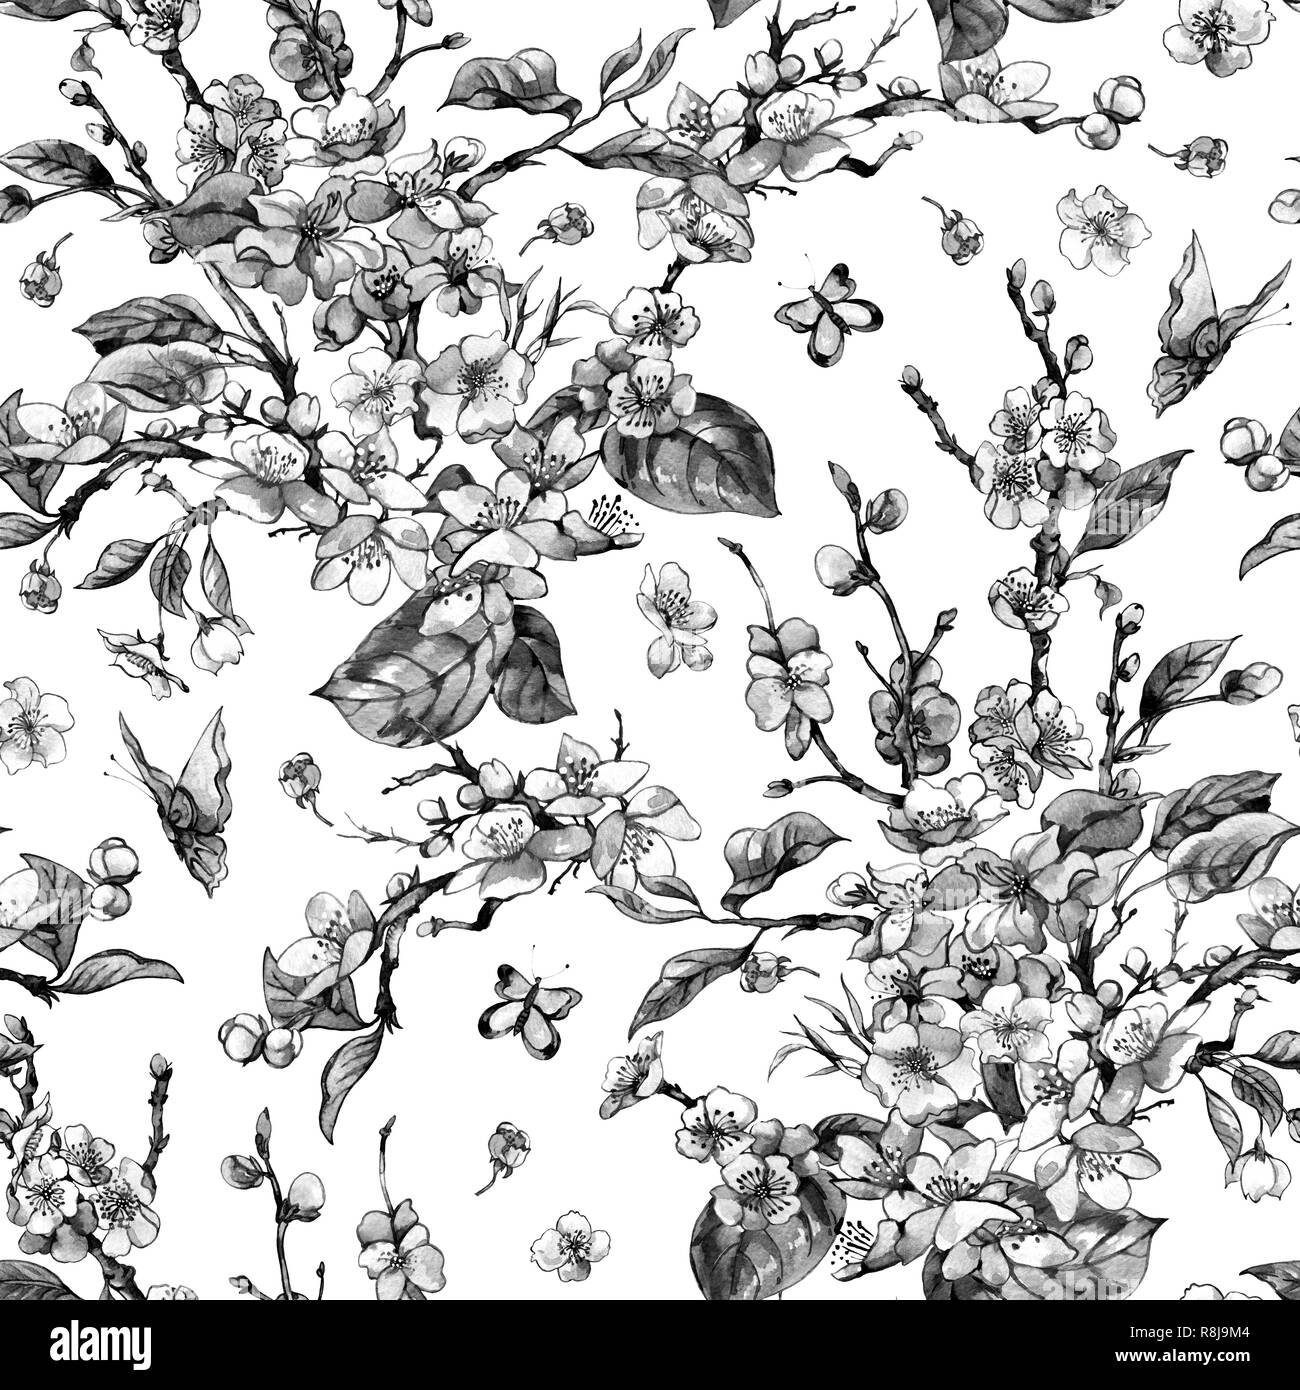 Watercolor black and white spring vintage floral seamless pattern with blooming branches of cherry peach, pear, sakura, apple trees and butterflies, f Stock Photo